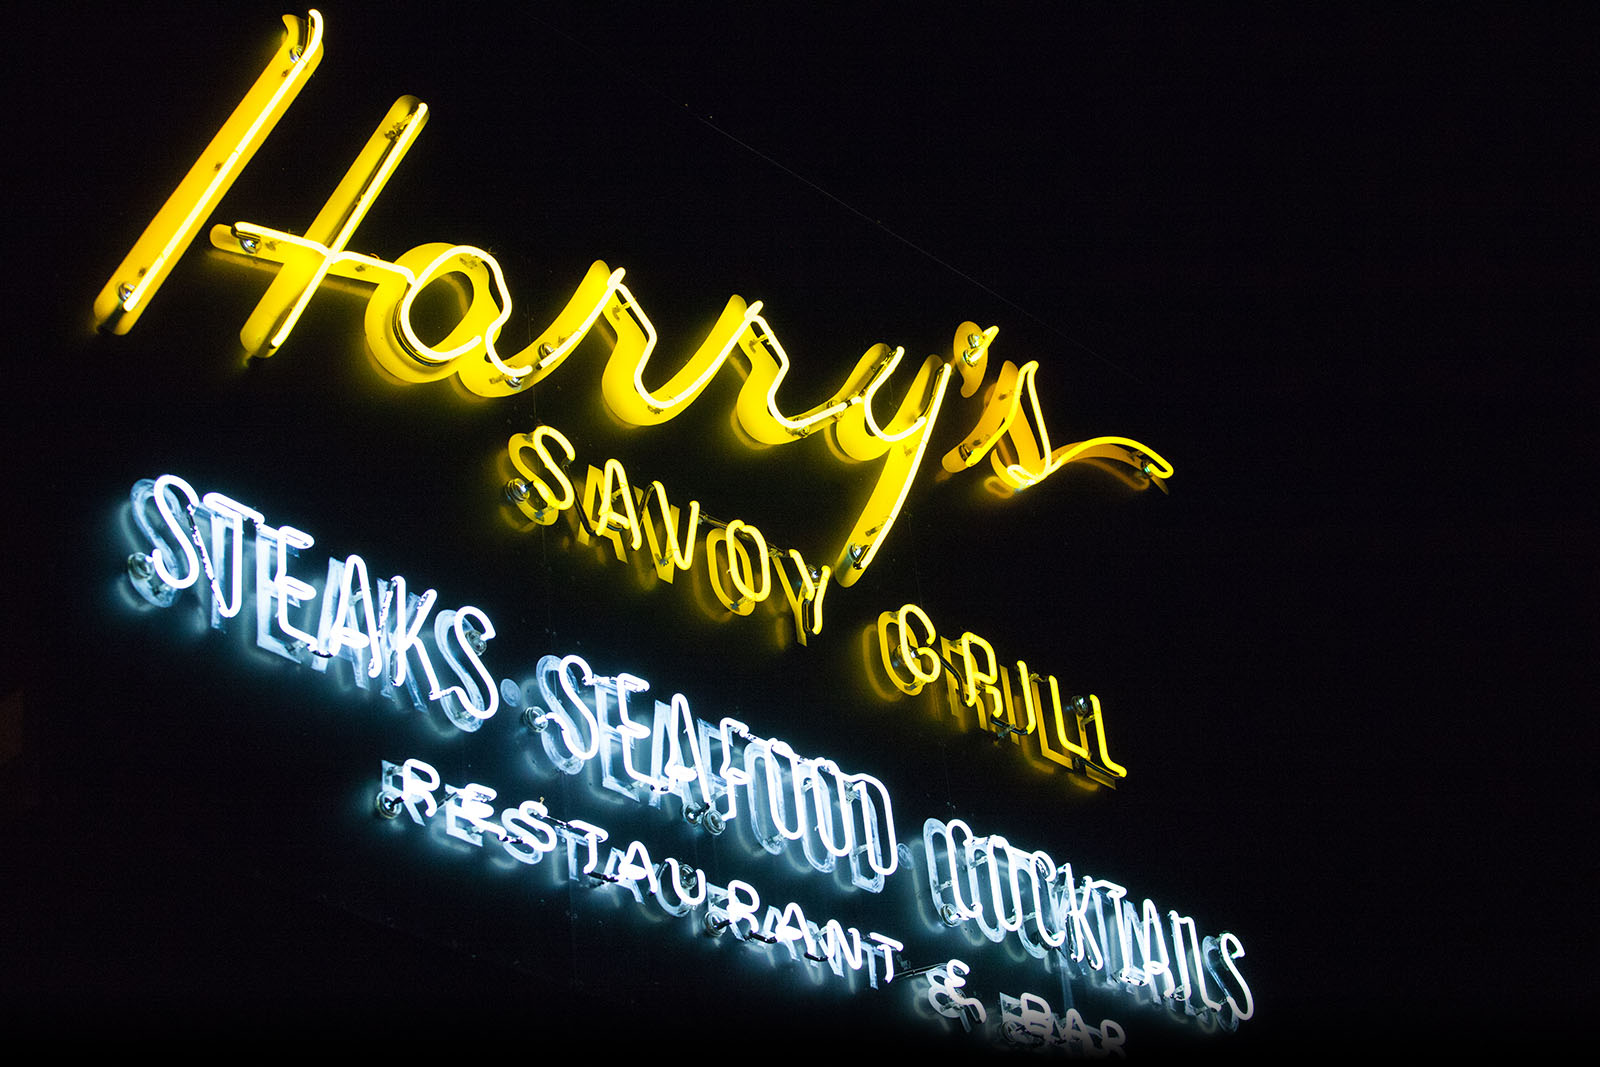 Upcoming - Harry's Savoy Grill